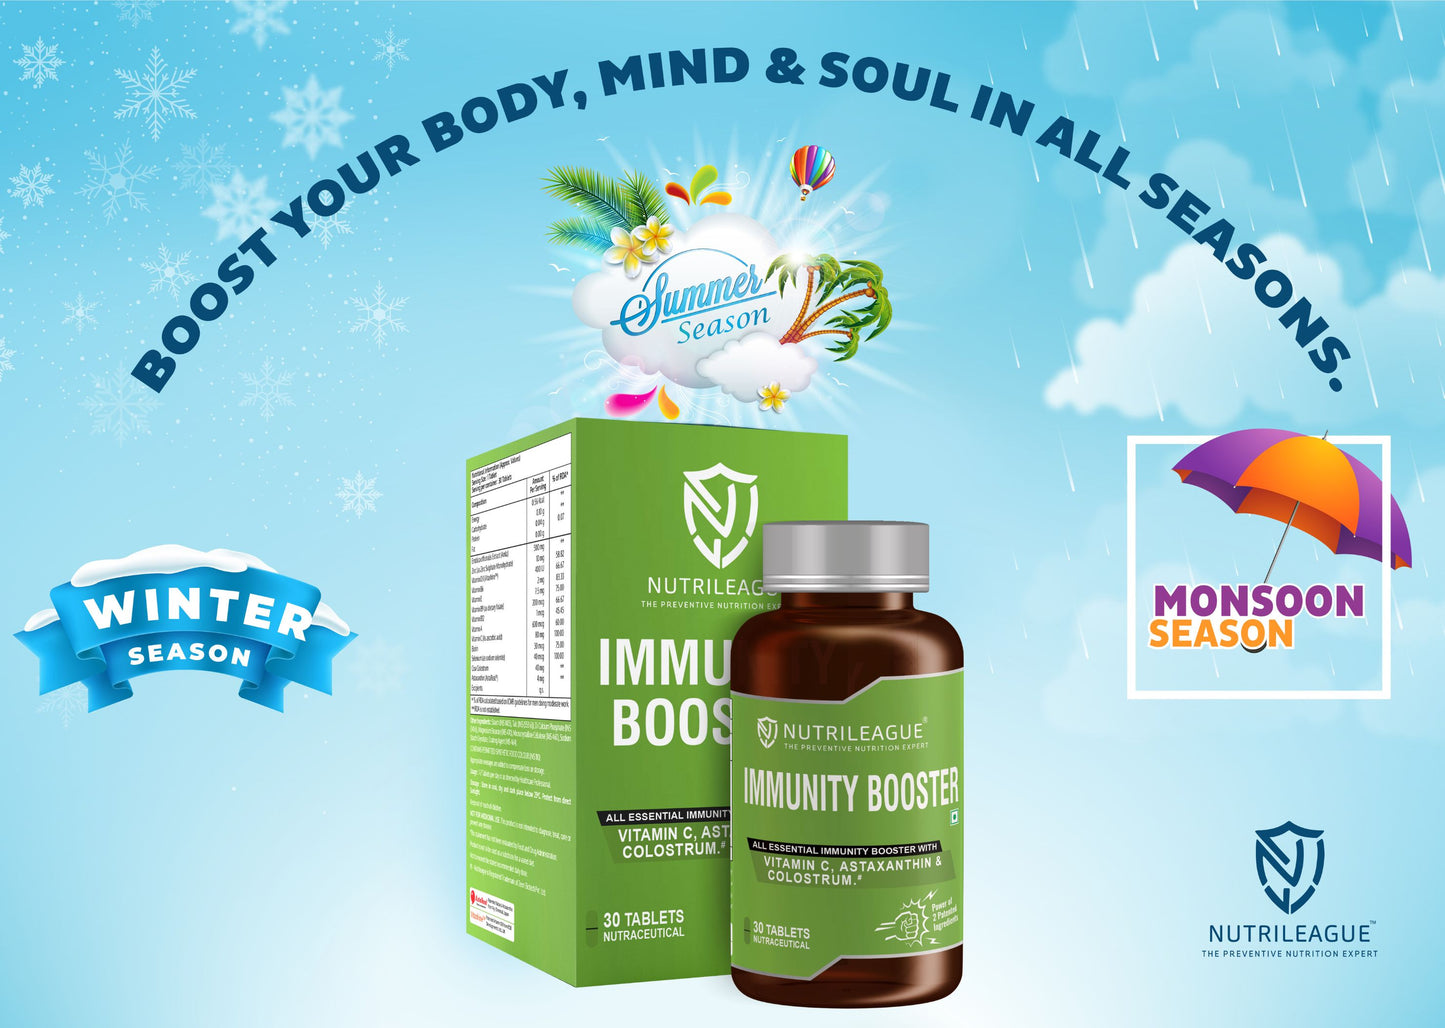 Immunity Booster Tablet